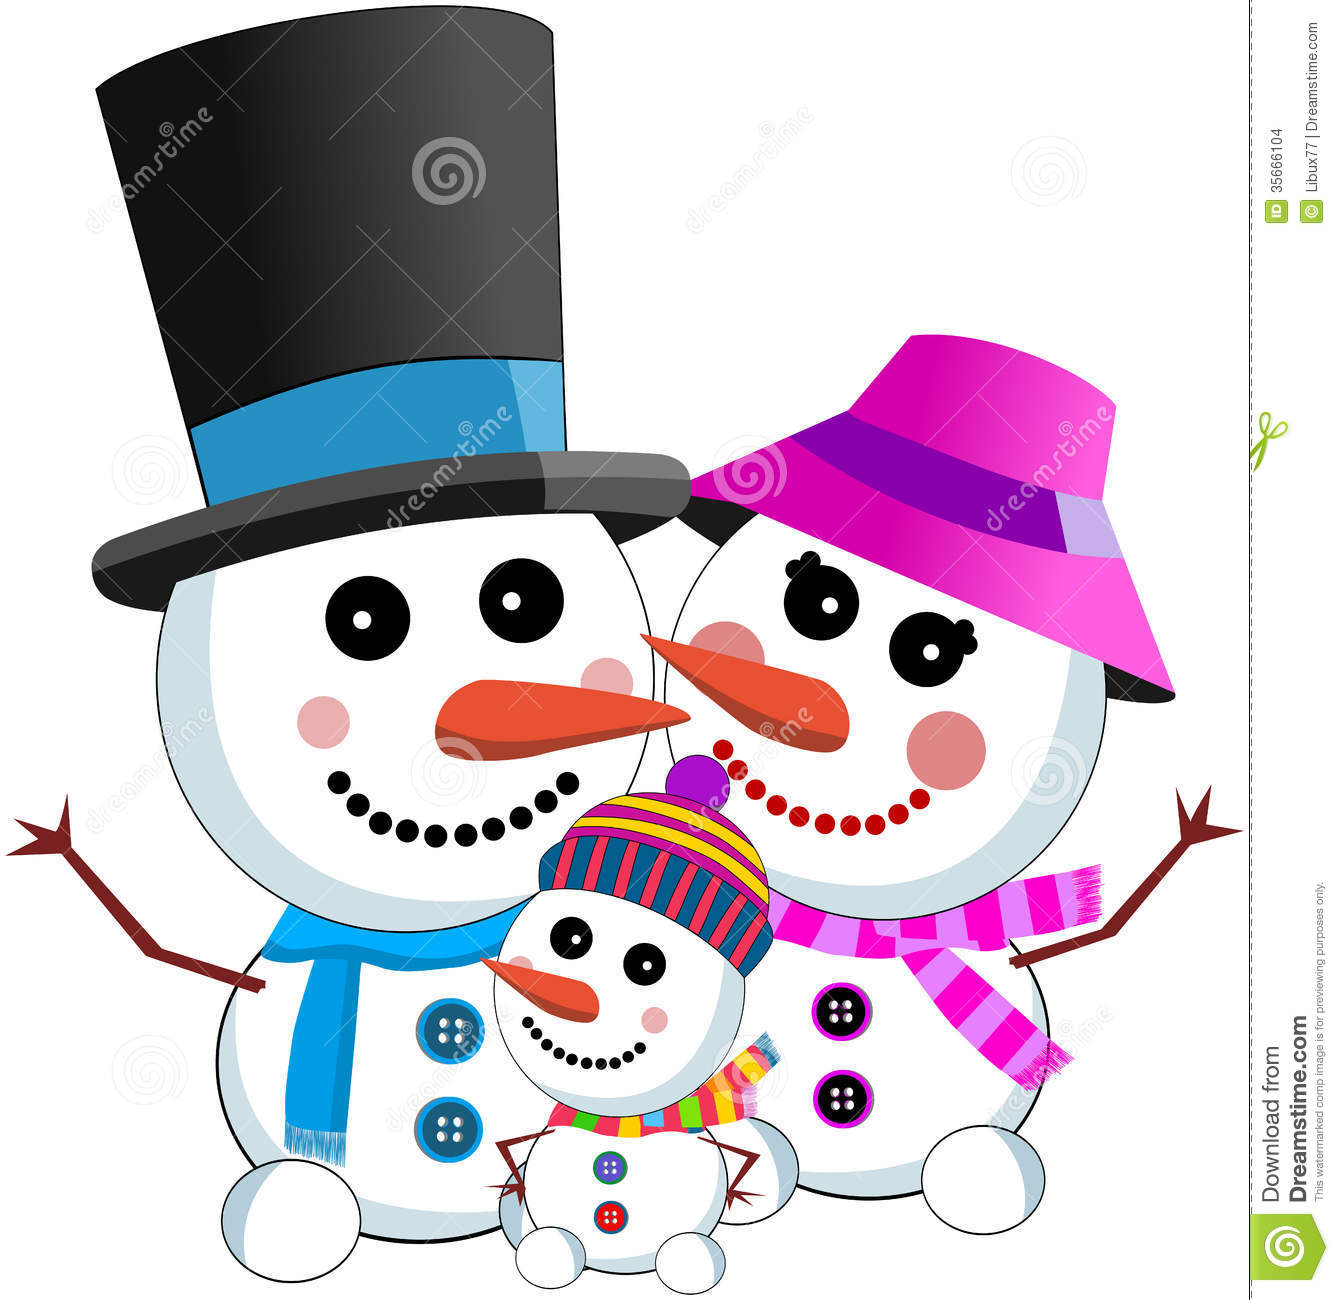 Illustration Featuring A Happy Snowman Family Wearing Scarf Top Hat